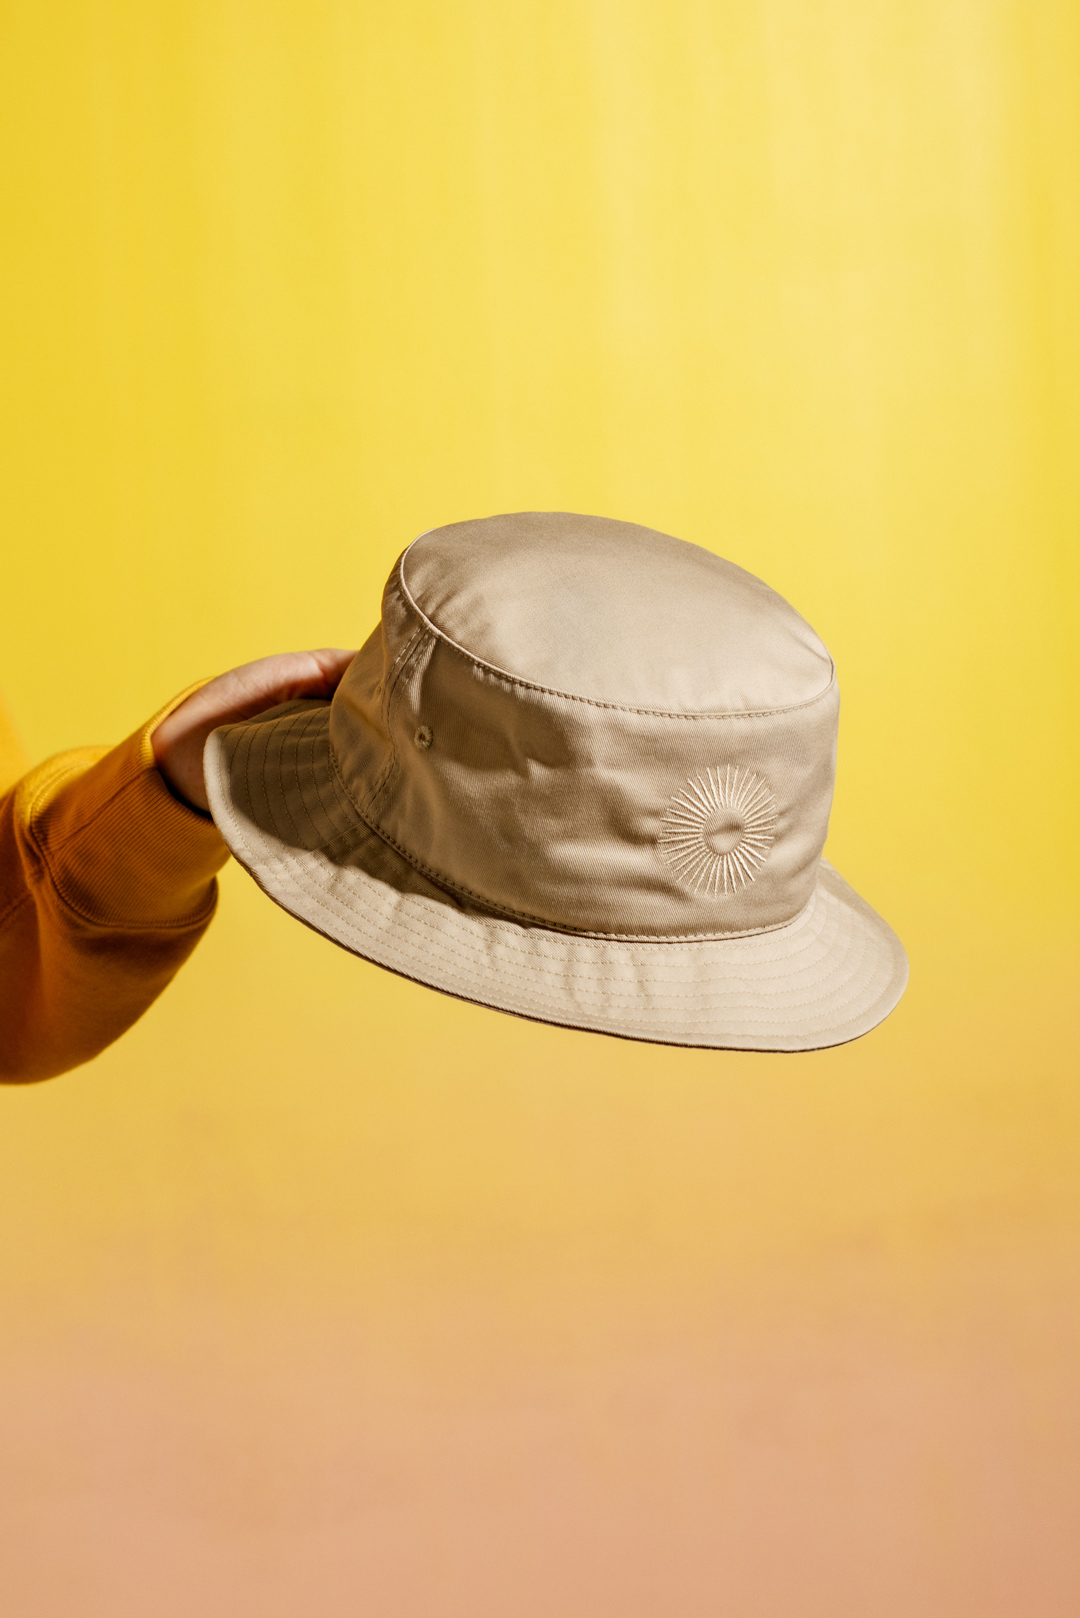 hand holding classic bucket hat on yellow backdrop